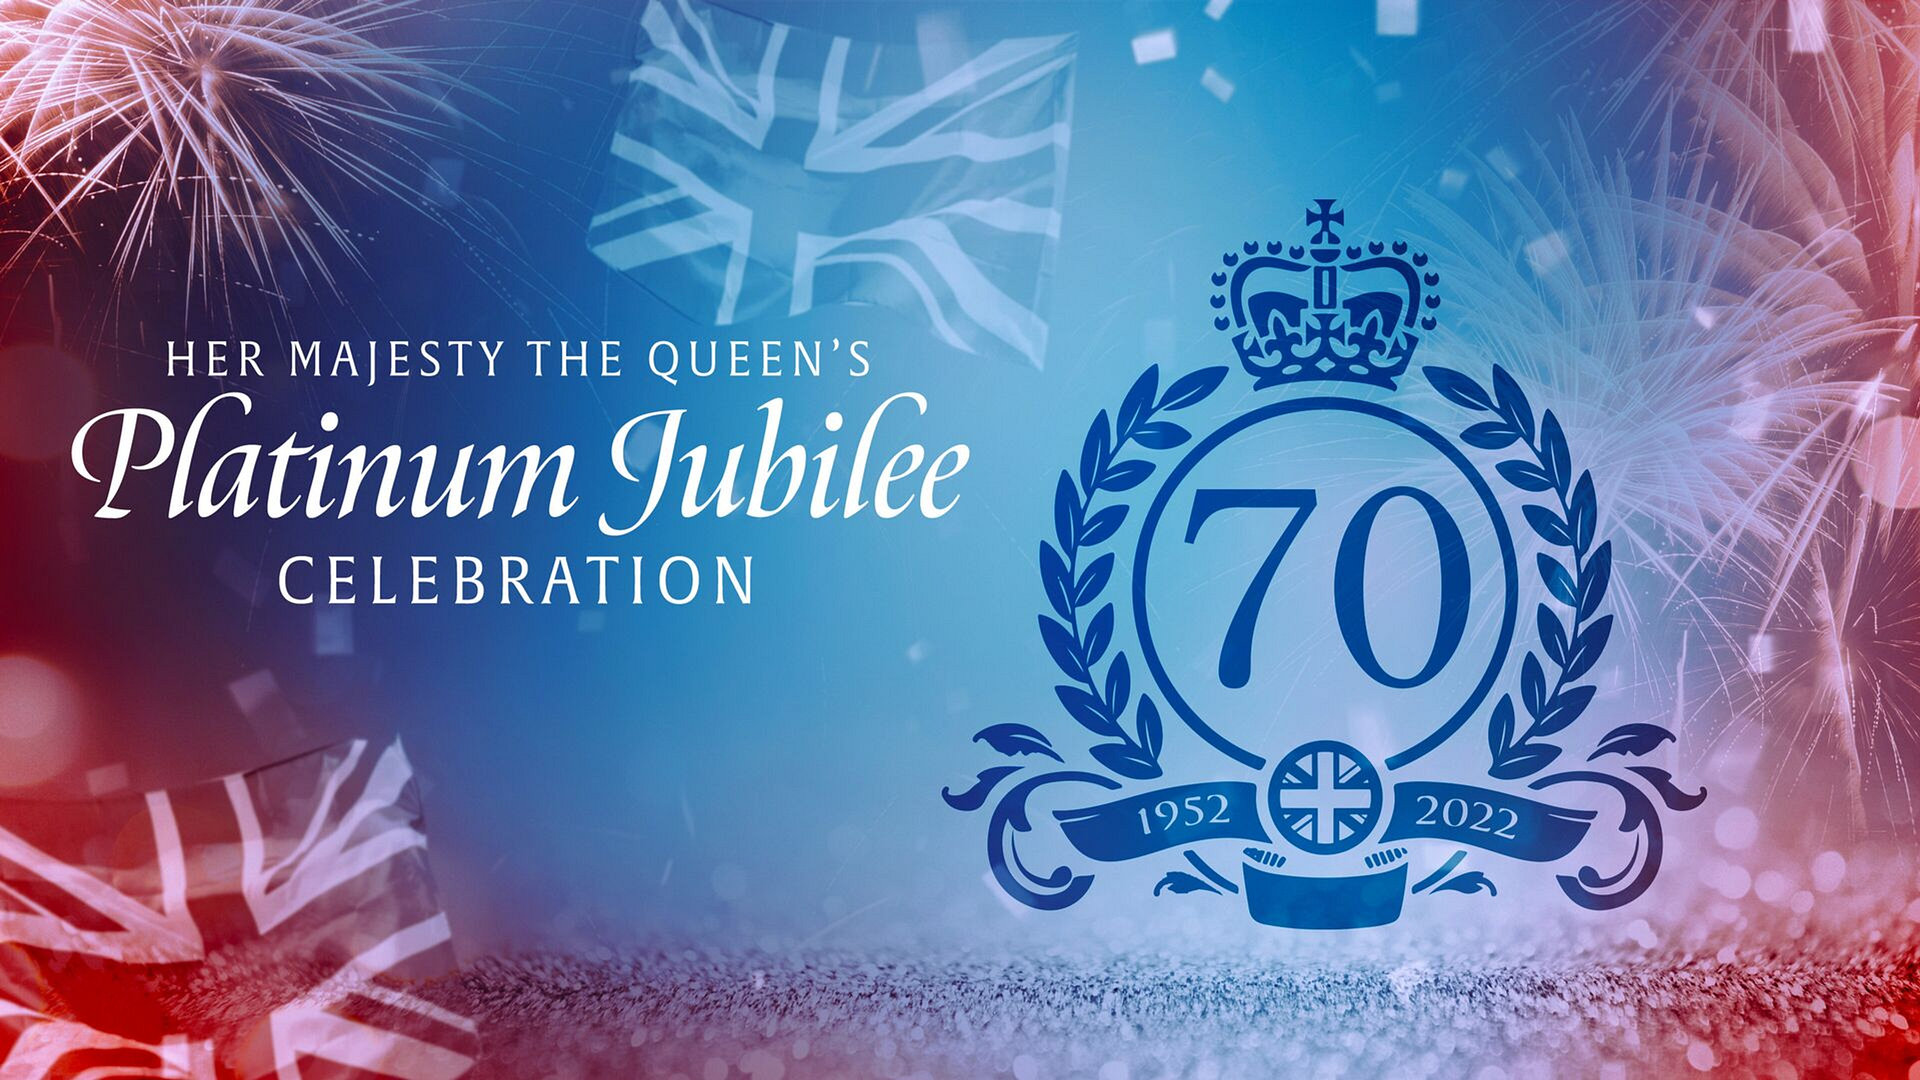 Her Majesty The Queen's Platinum Jubilee Celebration